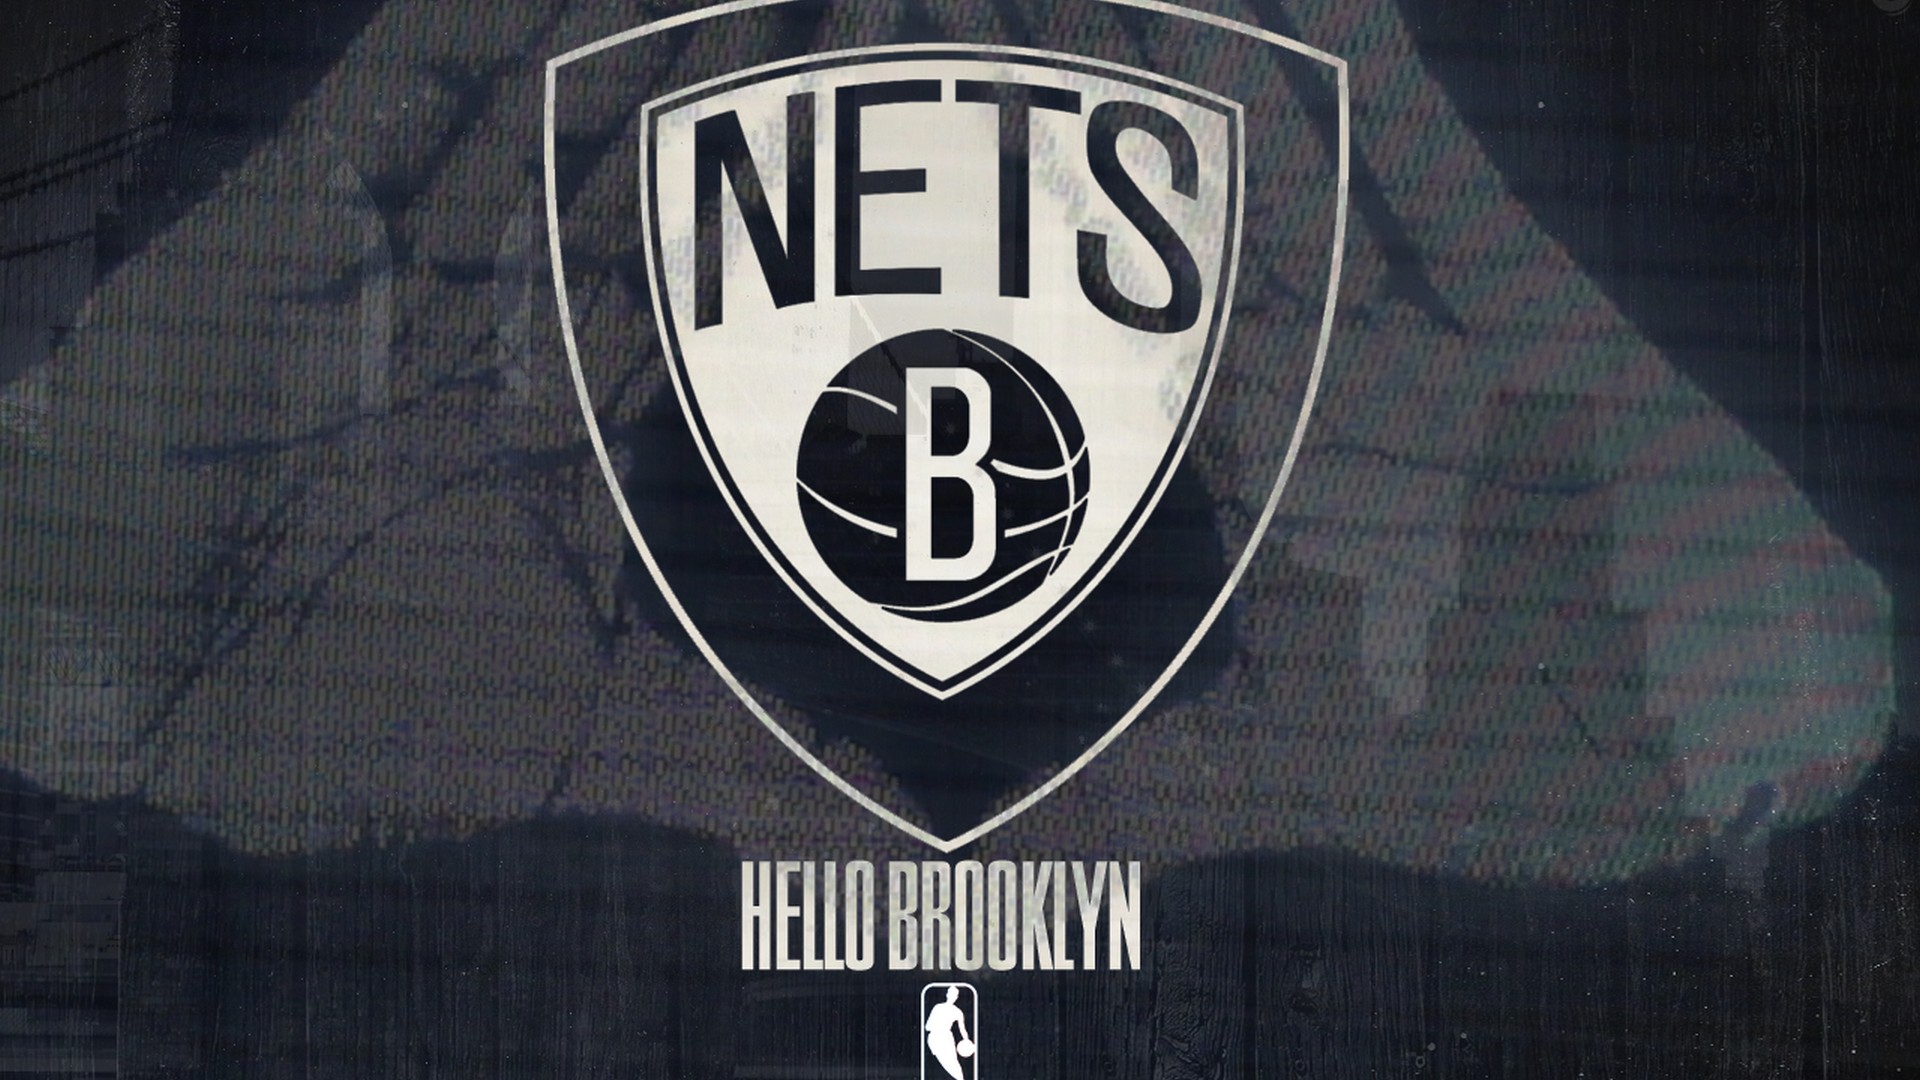 Brooklyn Nets Wallpaper For Mac Backgrounds with image dimensions 1920x1080 pixel. You can make this wallpaper for your Desktop Computer Backgrounds, Windows or Mac Screensavers, iPhone Lock screen, Tablet or Android and another Mobile Phone device